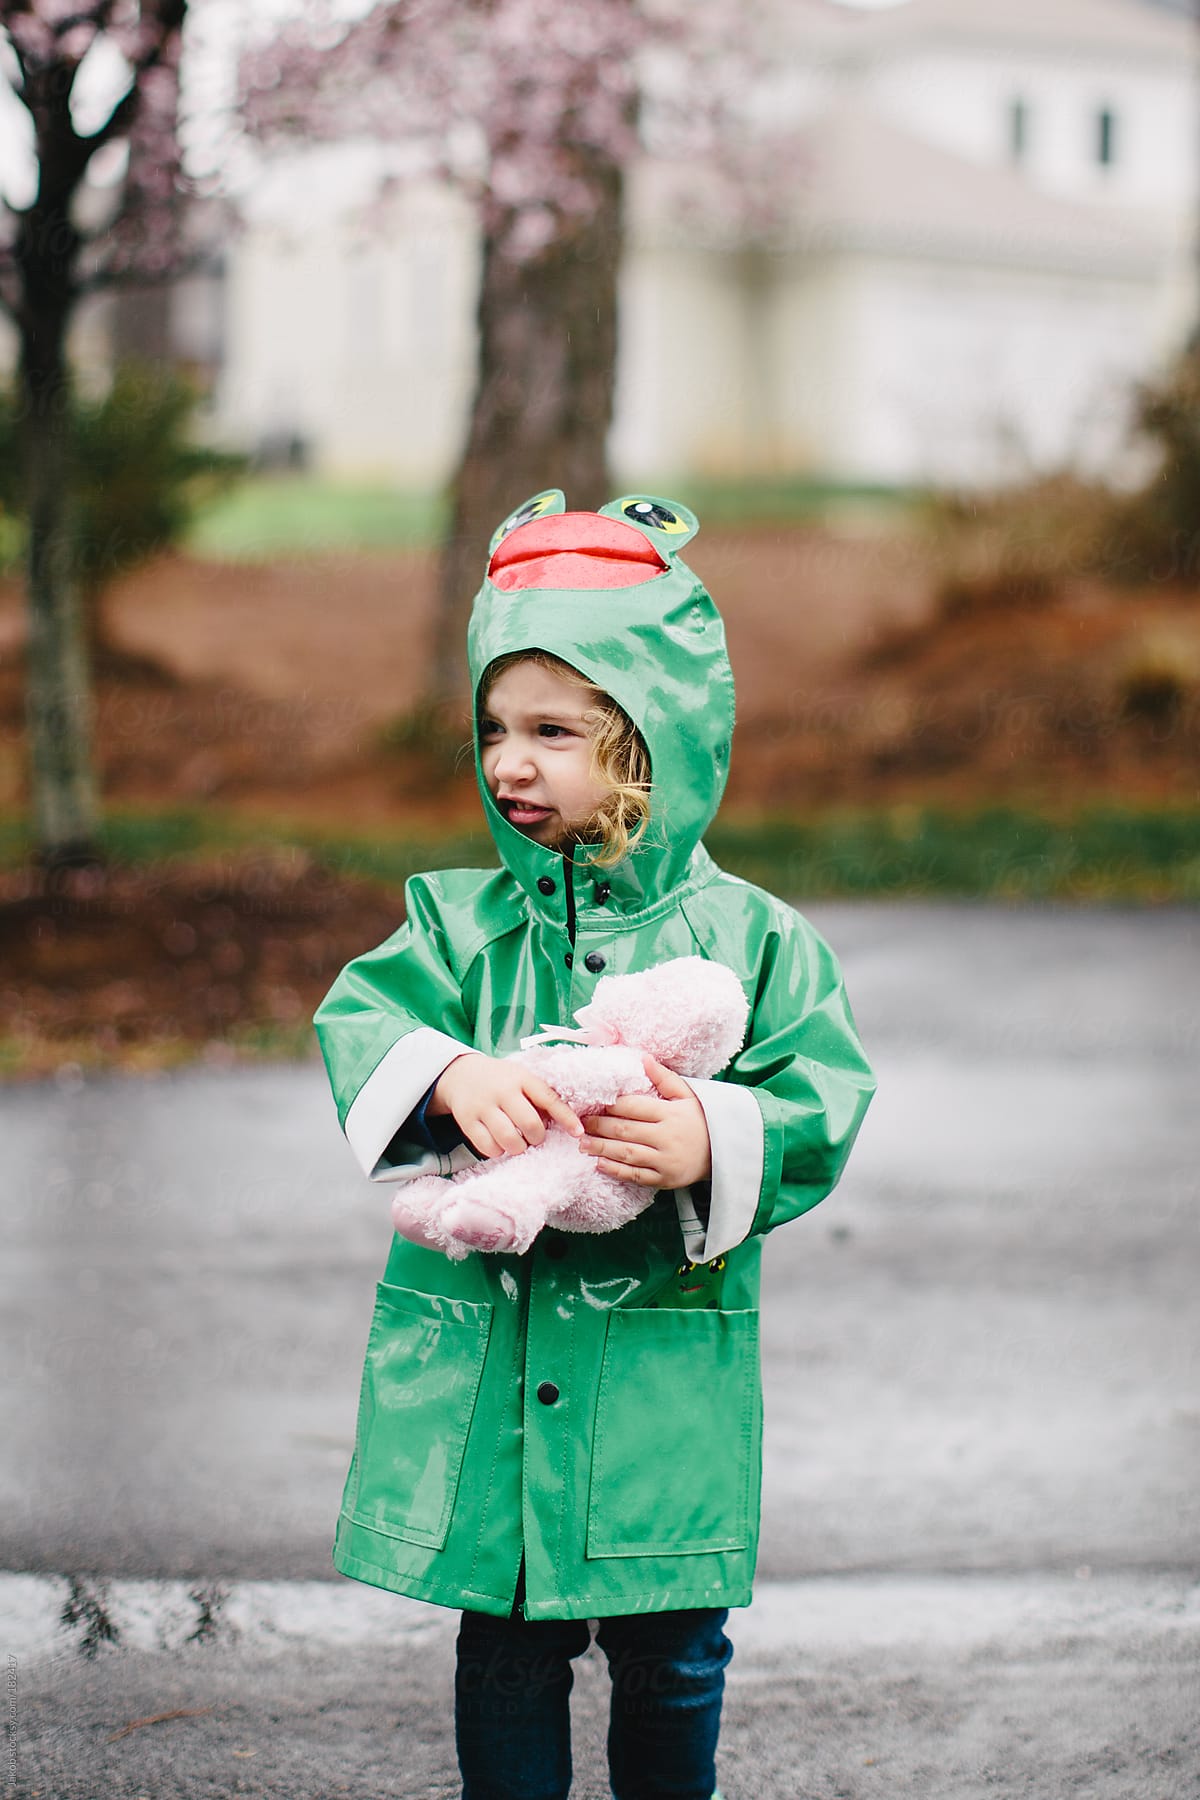 Toddler in a raincoat playing in the rain